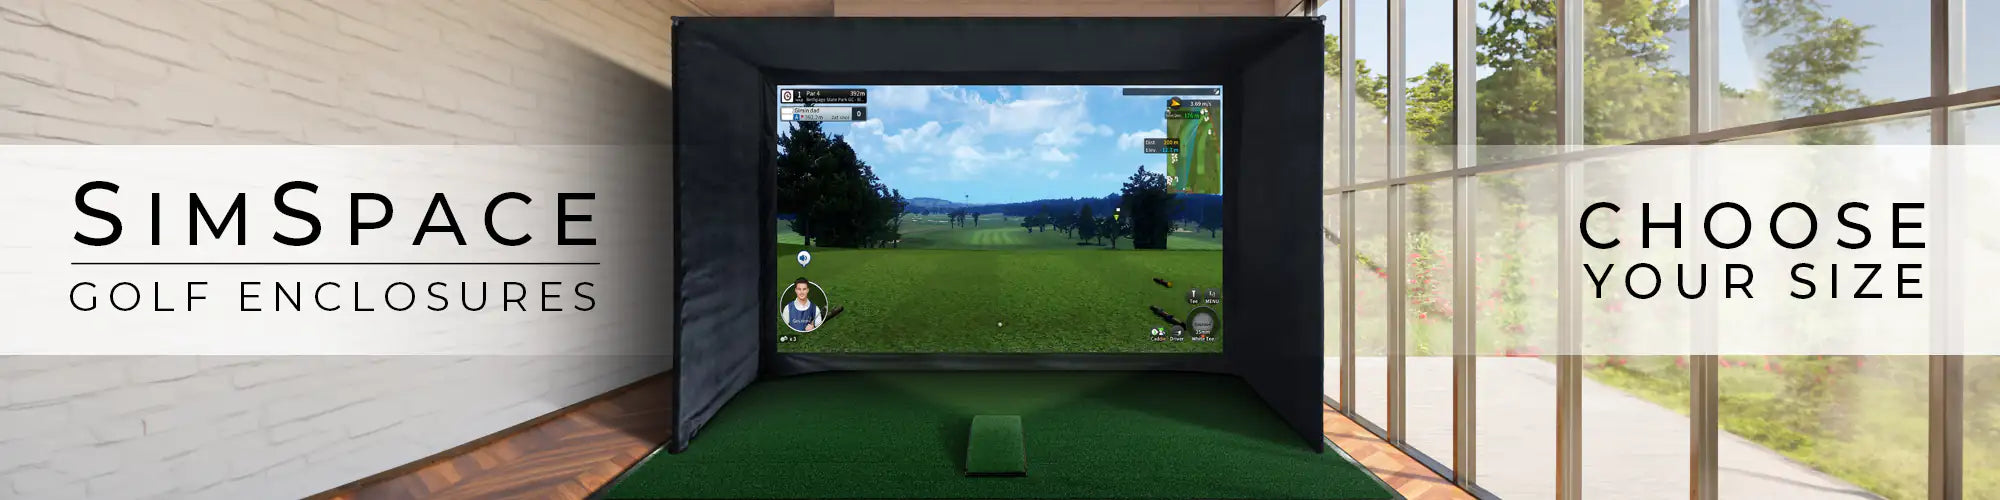 SimSpace Golf Enclosures Choose Your Size Banner